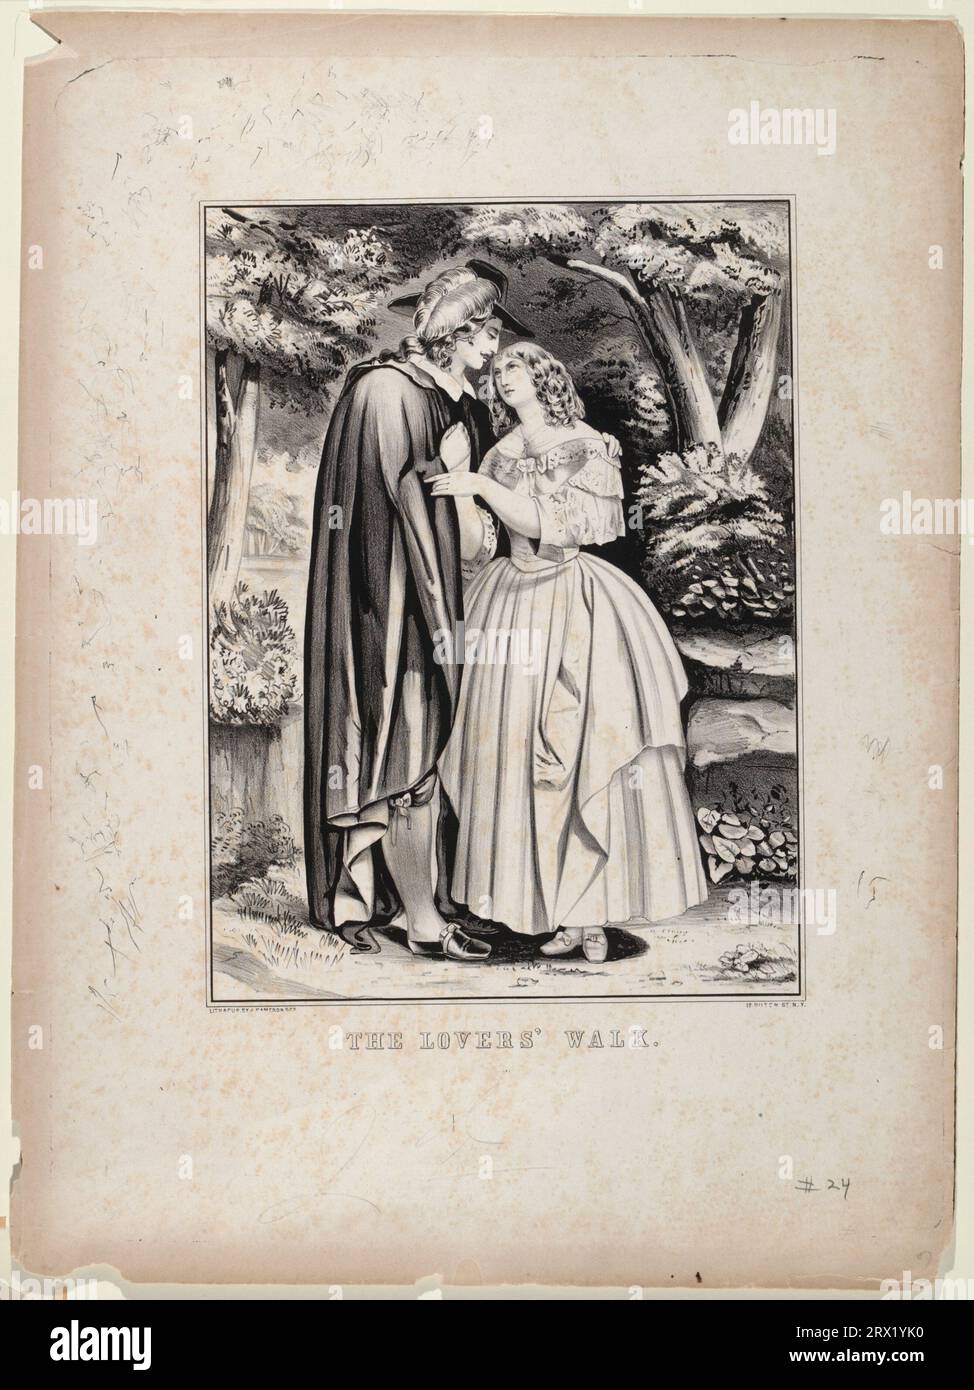 Lithographie, 'The Lovers' Walk'. DL*60.2244. Peters Prints Collection. Stockfoto